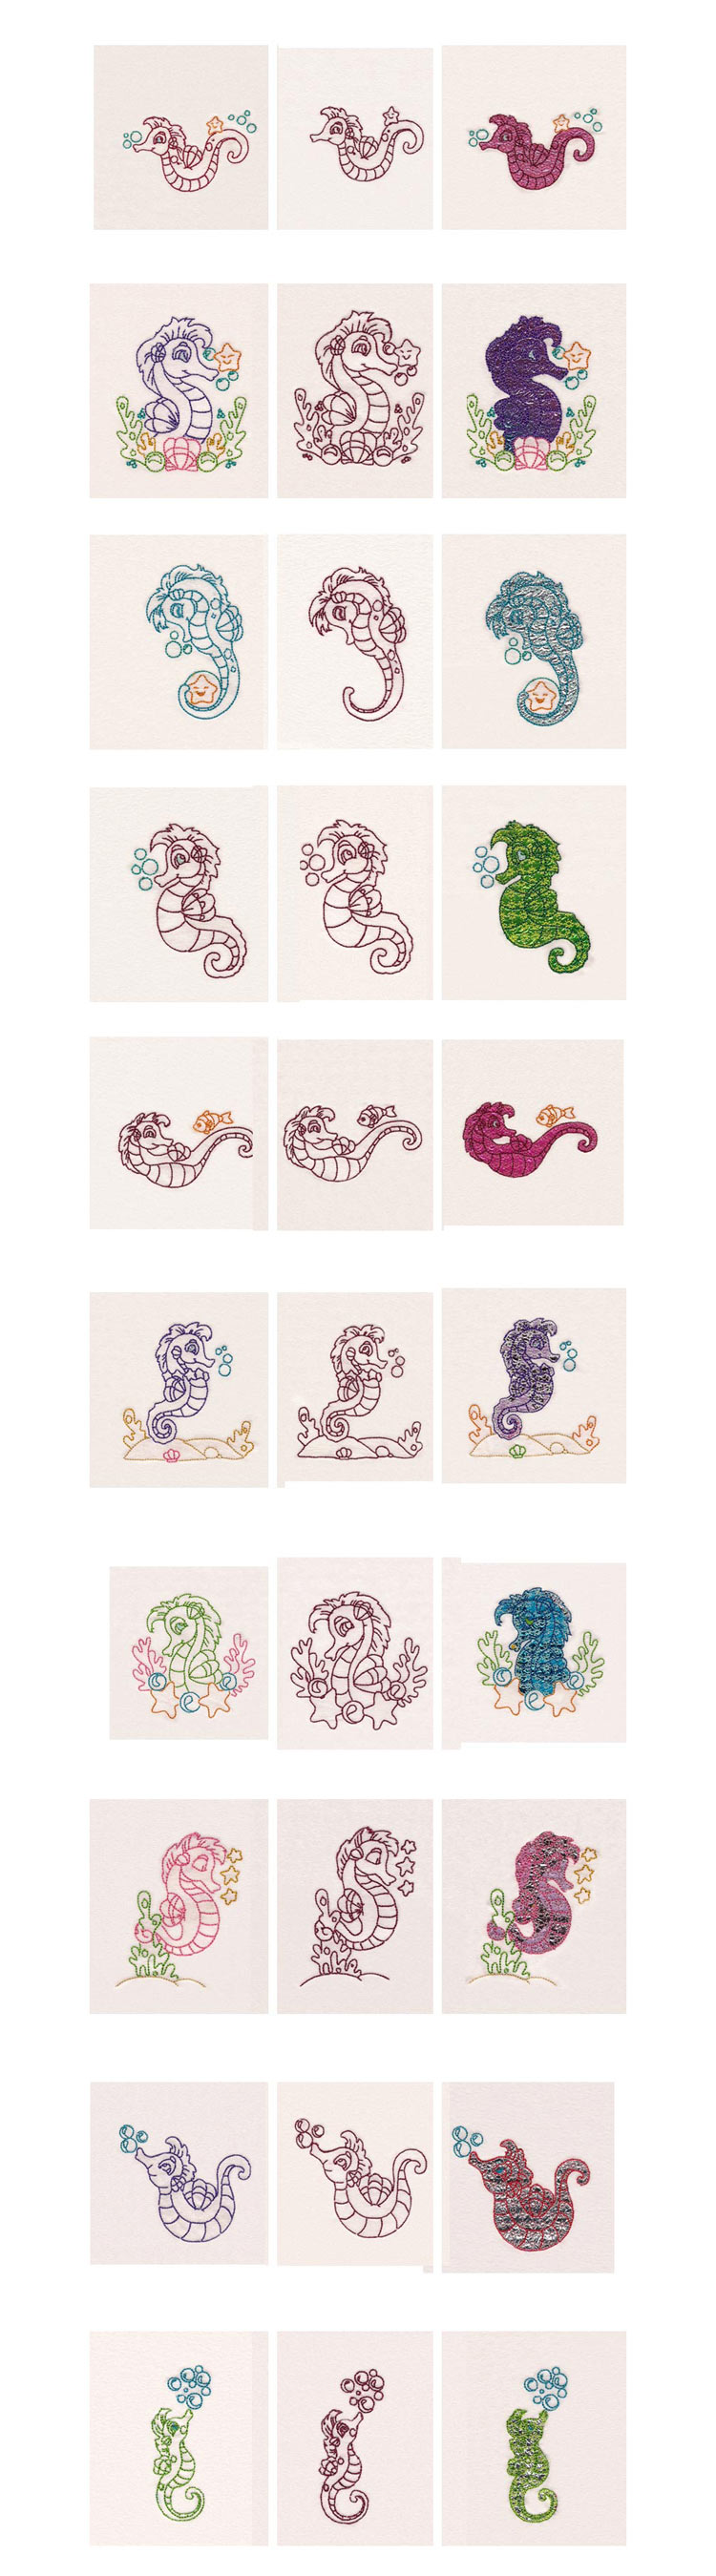 Little Seahorses 3 For 1 Embroidery Machine Design Details